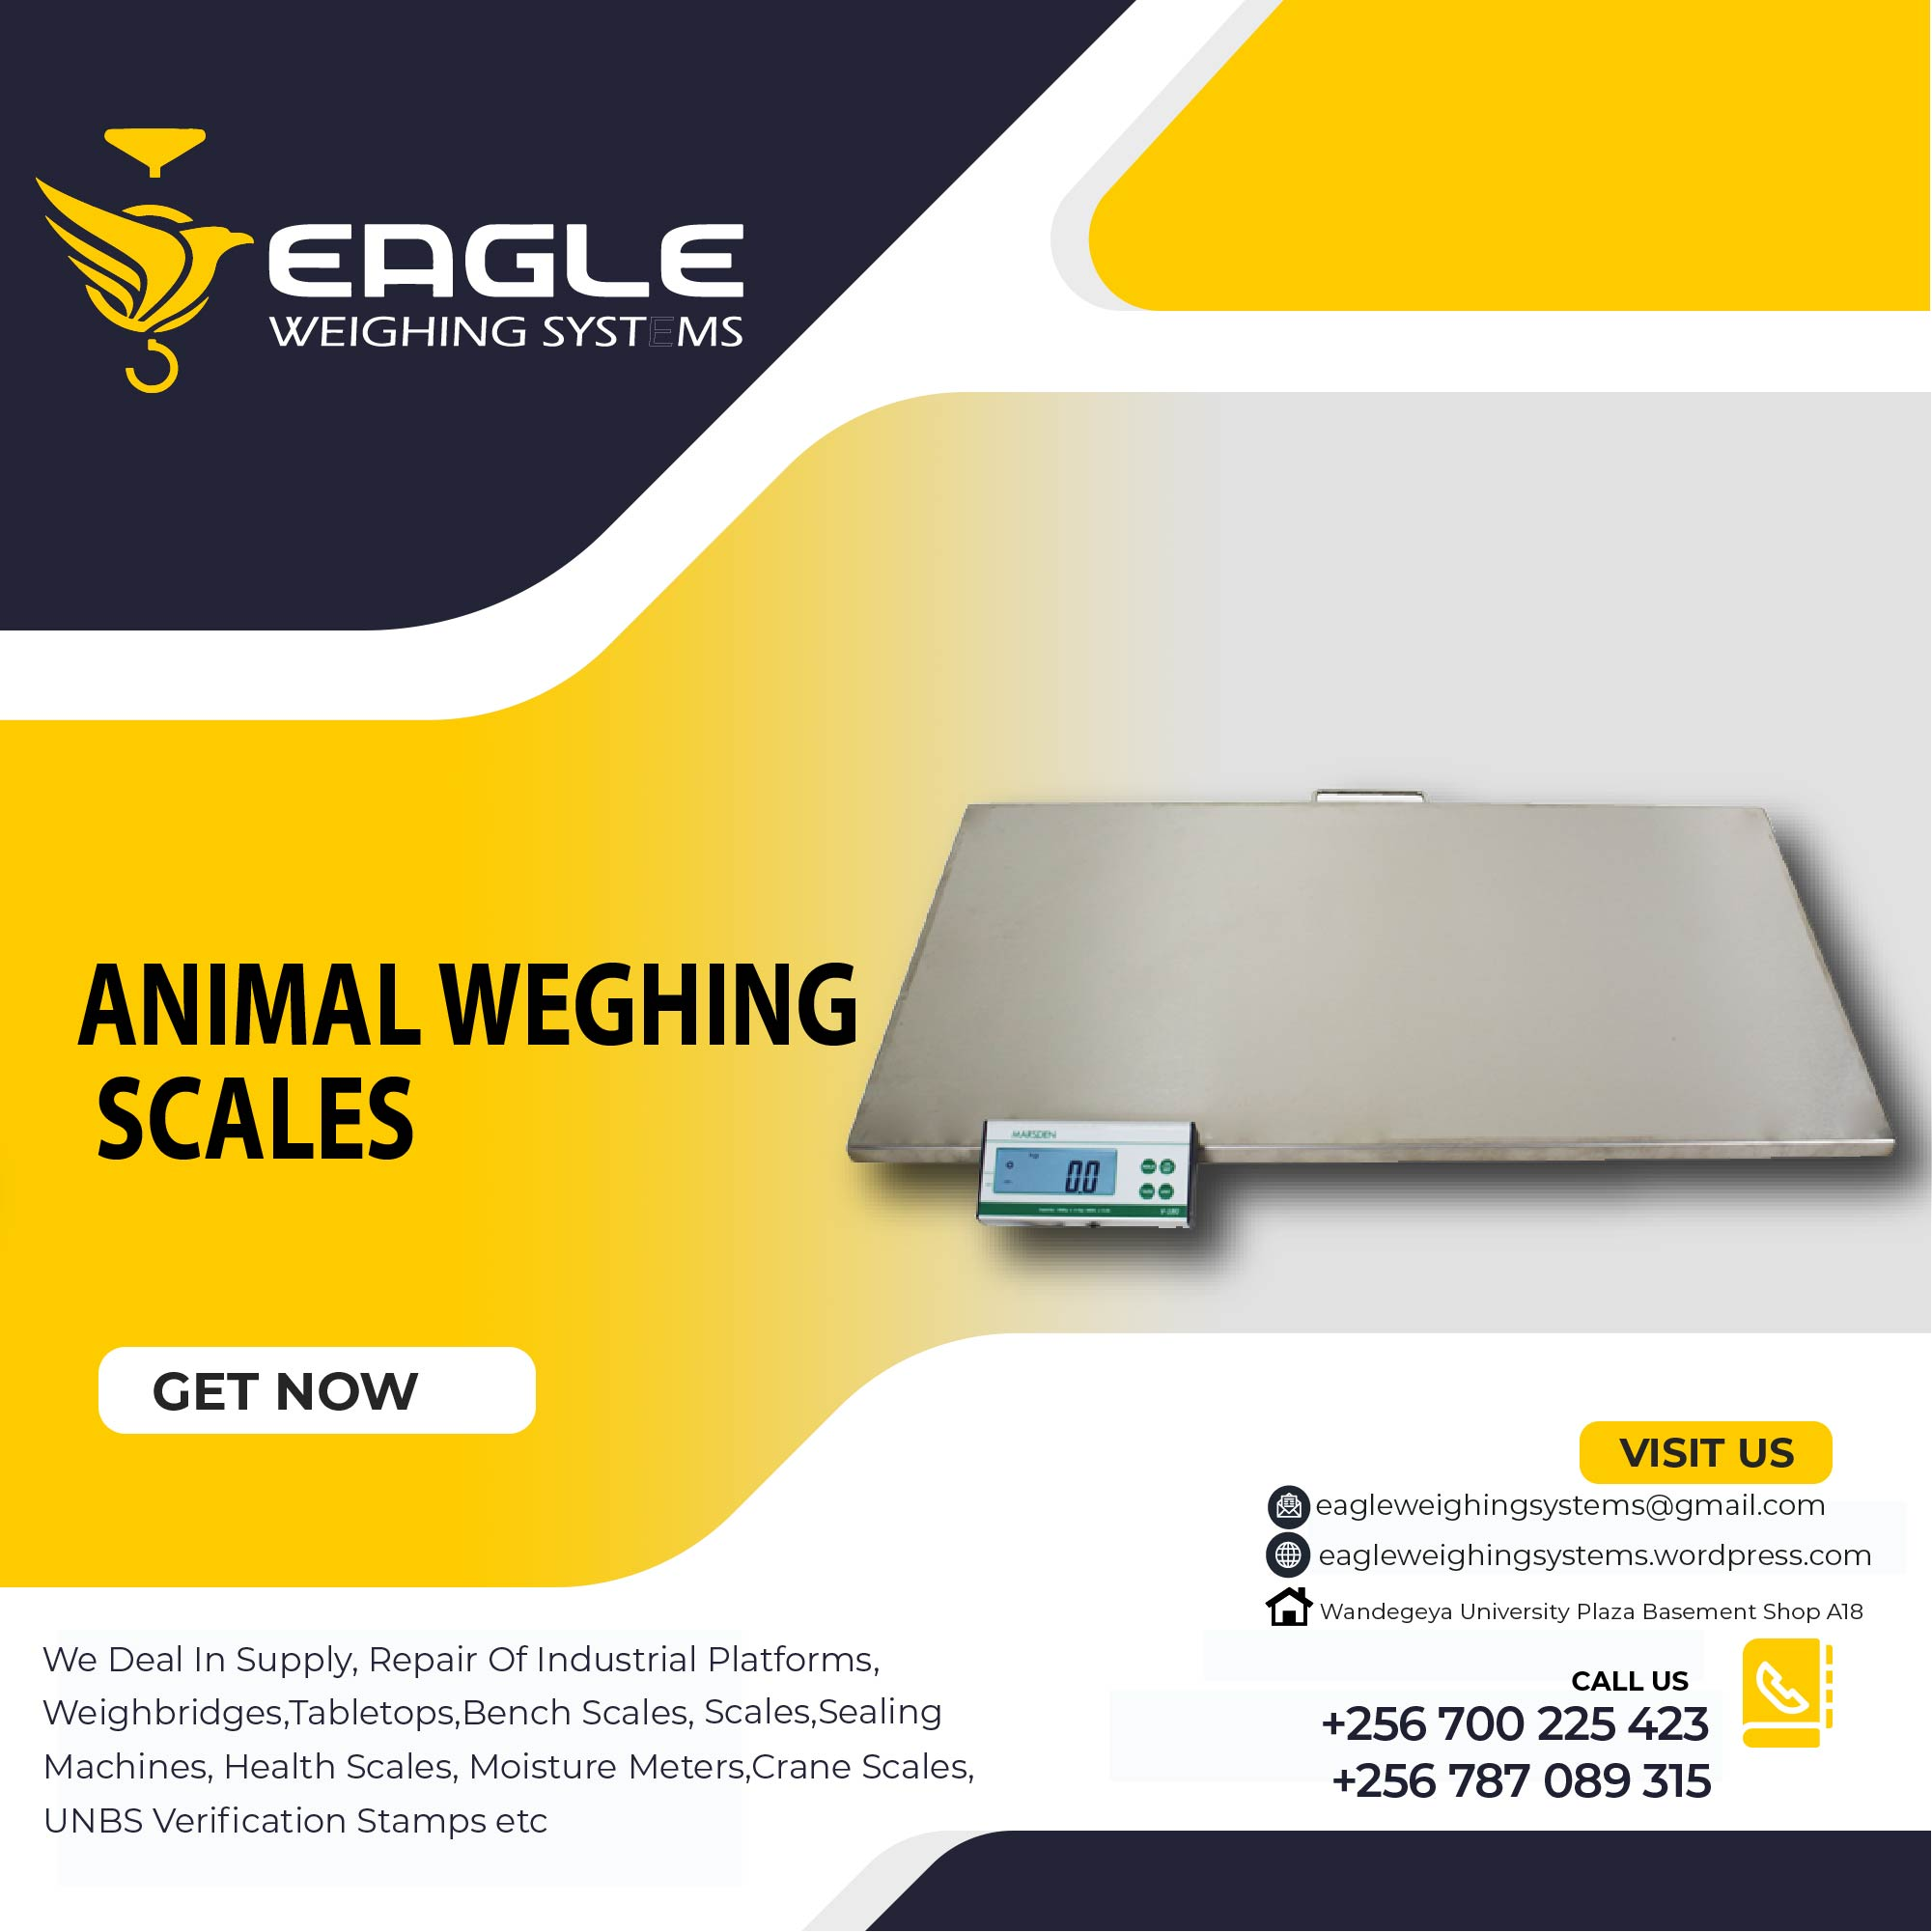 What is the price of animal weighing scale in Kampala ?'